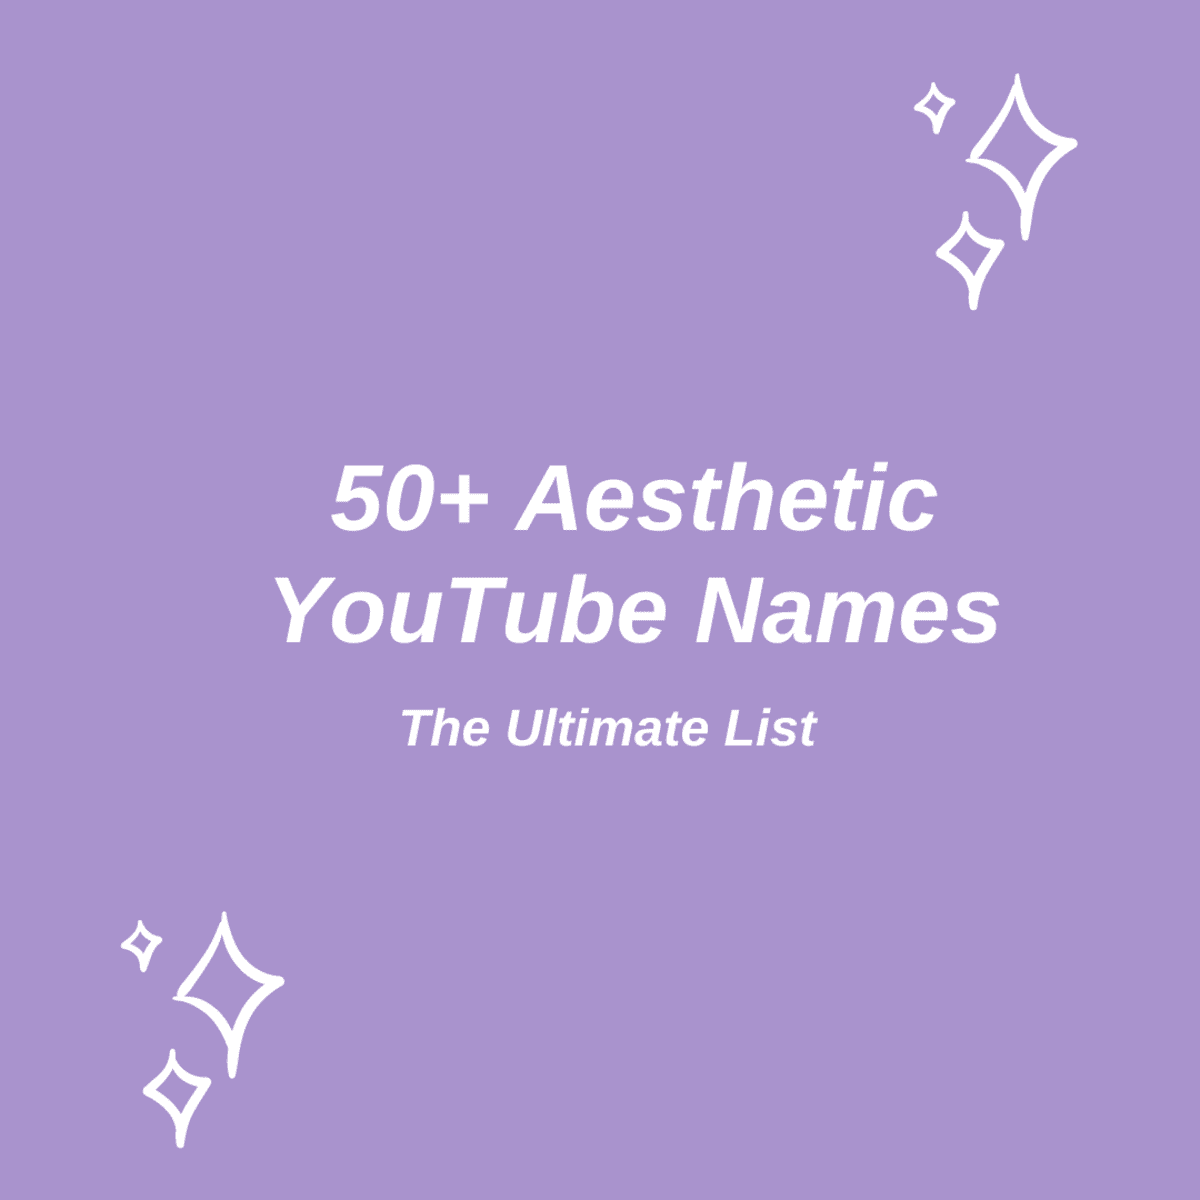 50+ Aesthetic YouTube Names to Check Out: The Ultimate List - TurboFuture